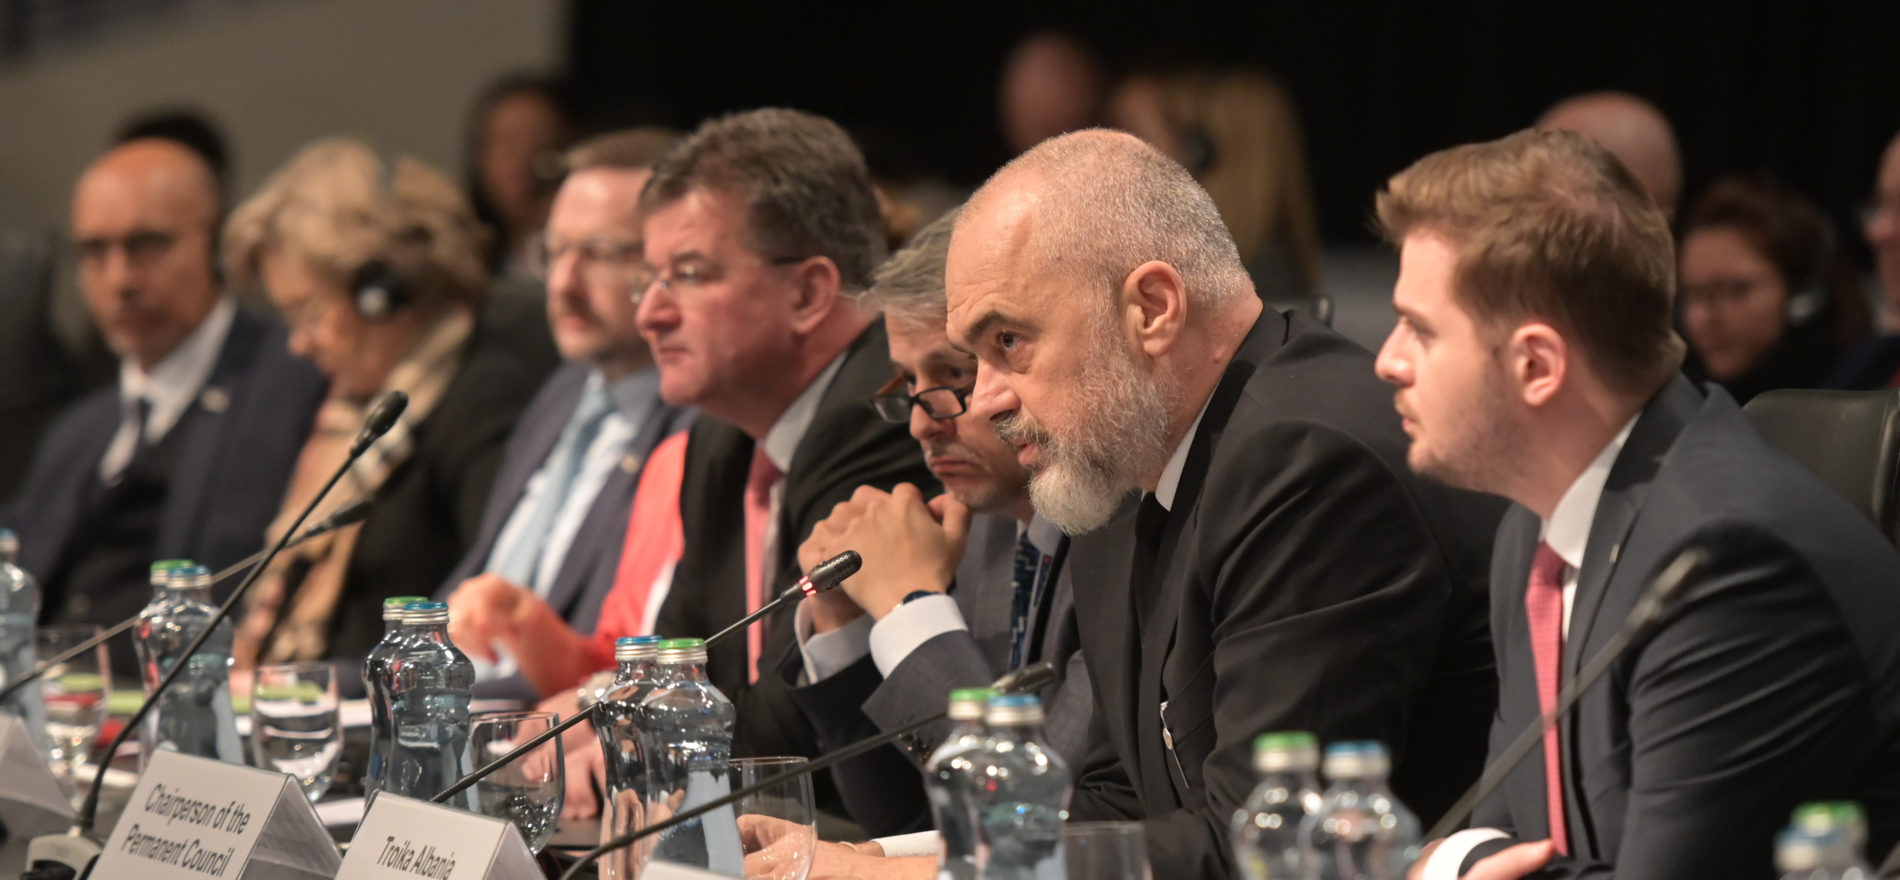 Edi Rama, Prime Minister of Albania during the opening session of the 26th OSCE Ministerial Council, Bratislava, 5 December 2019. Copyright: All rights reserved to OSCE/441751